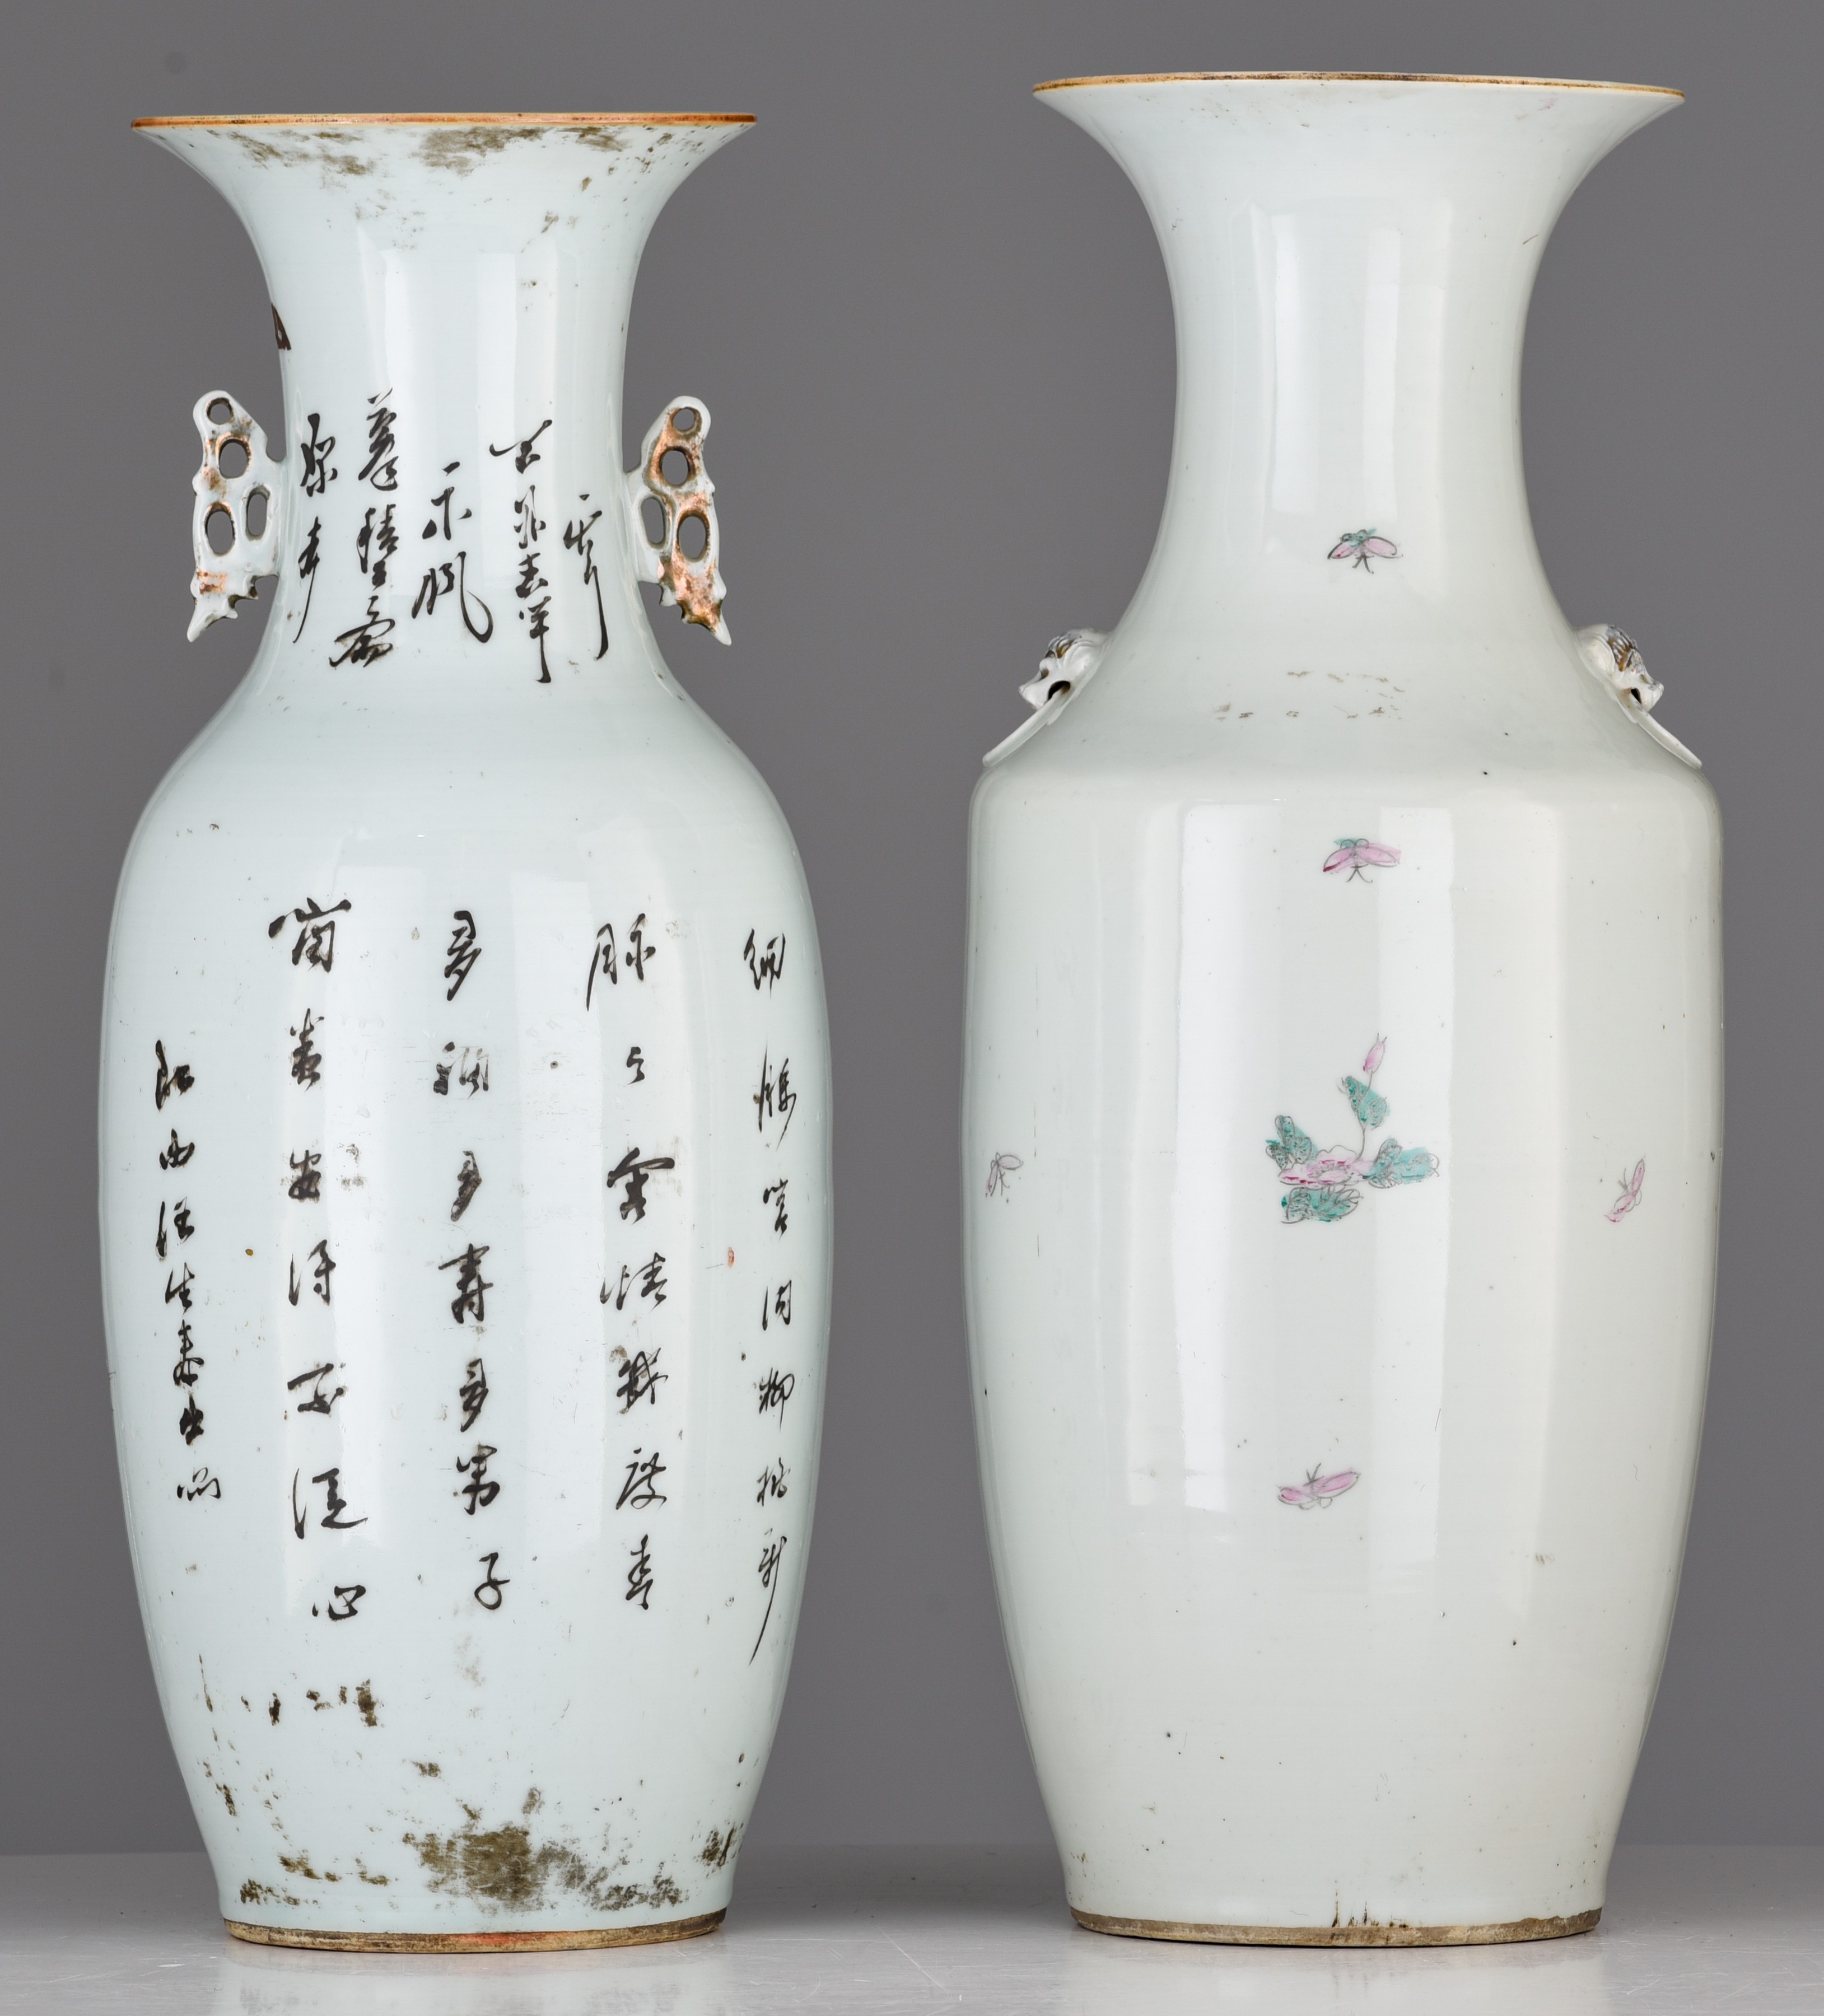 Two Chinese famille rose vases, one with a signed text, Republic period, H 57 - 57,5 cm - Image 4 of 7